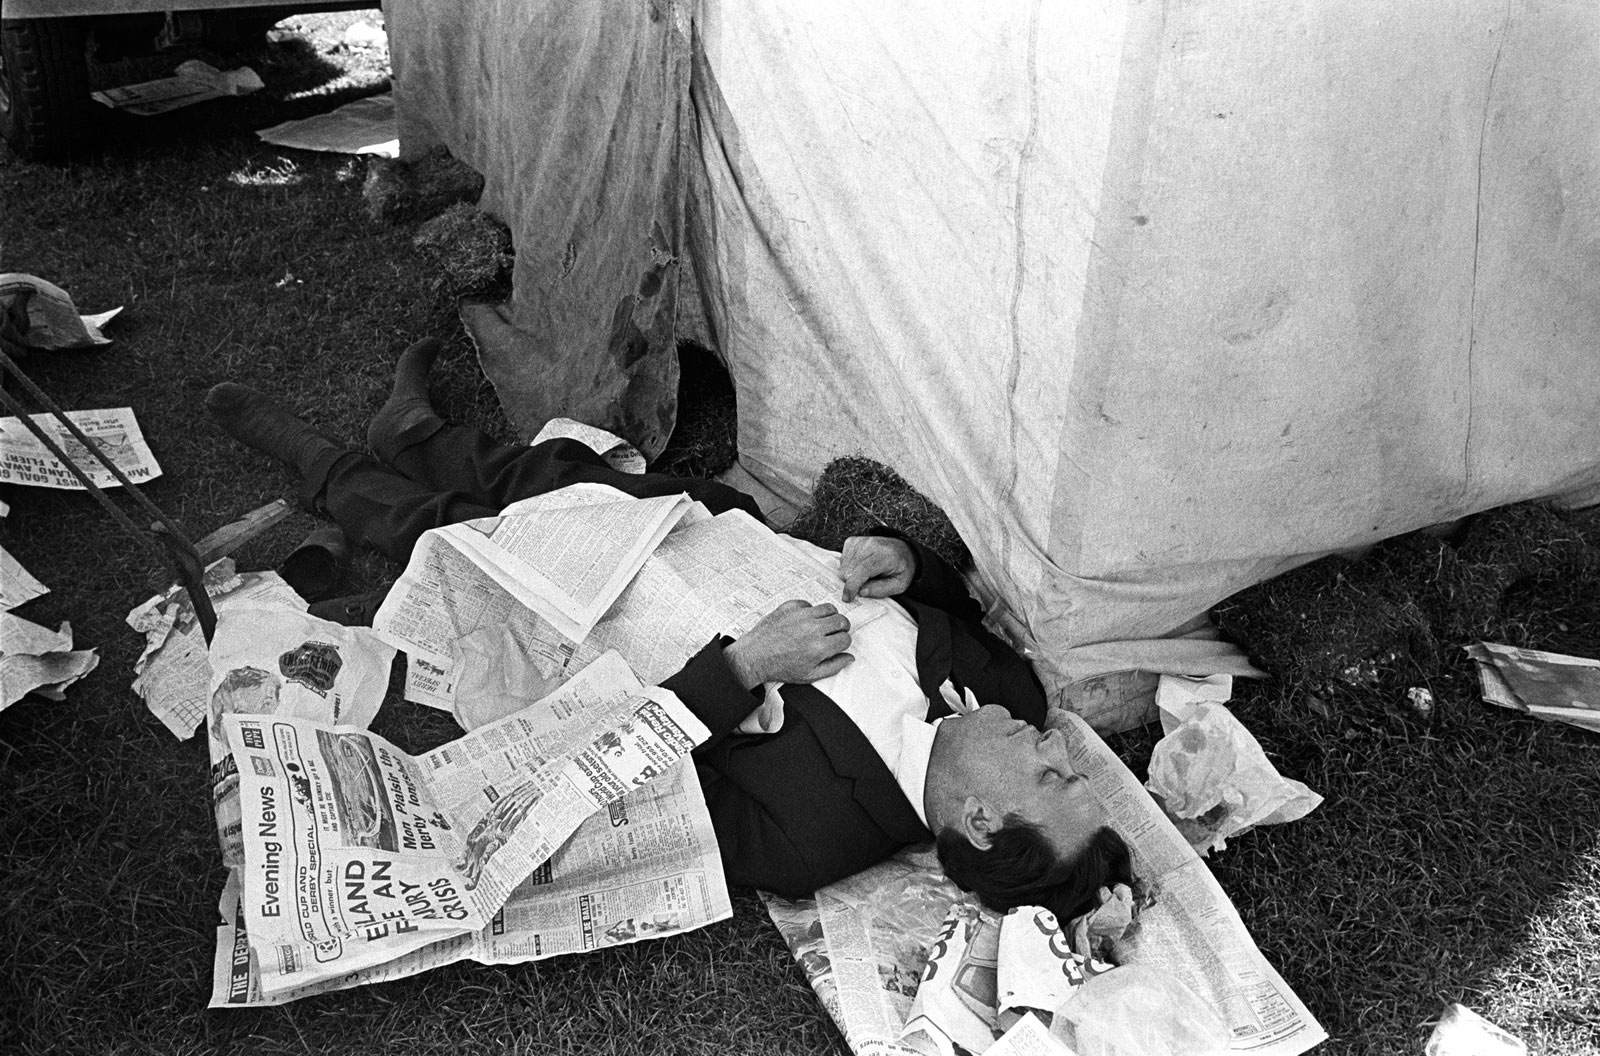 Derby Day annual horse race, sleeping off an alcoholic afternoon, Epsom Downs, Surrey, 1970